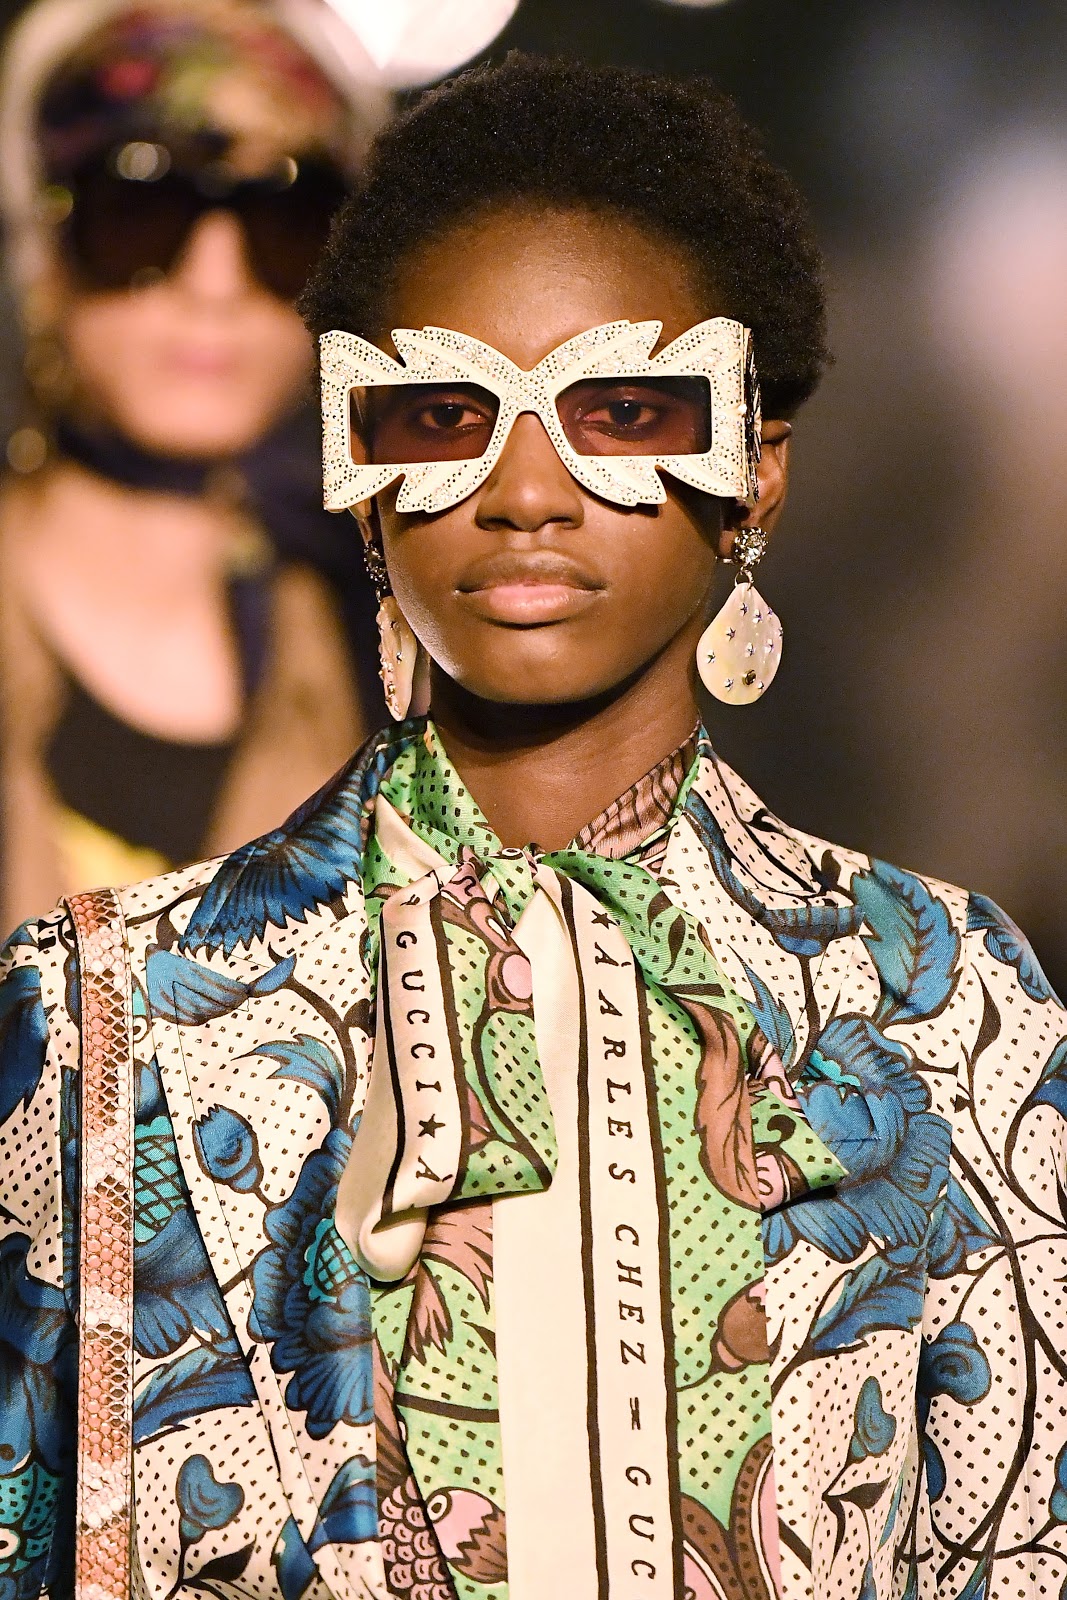 Gucci Resort 2019 Runway Details & backstage | Cool Chic Style Fashion